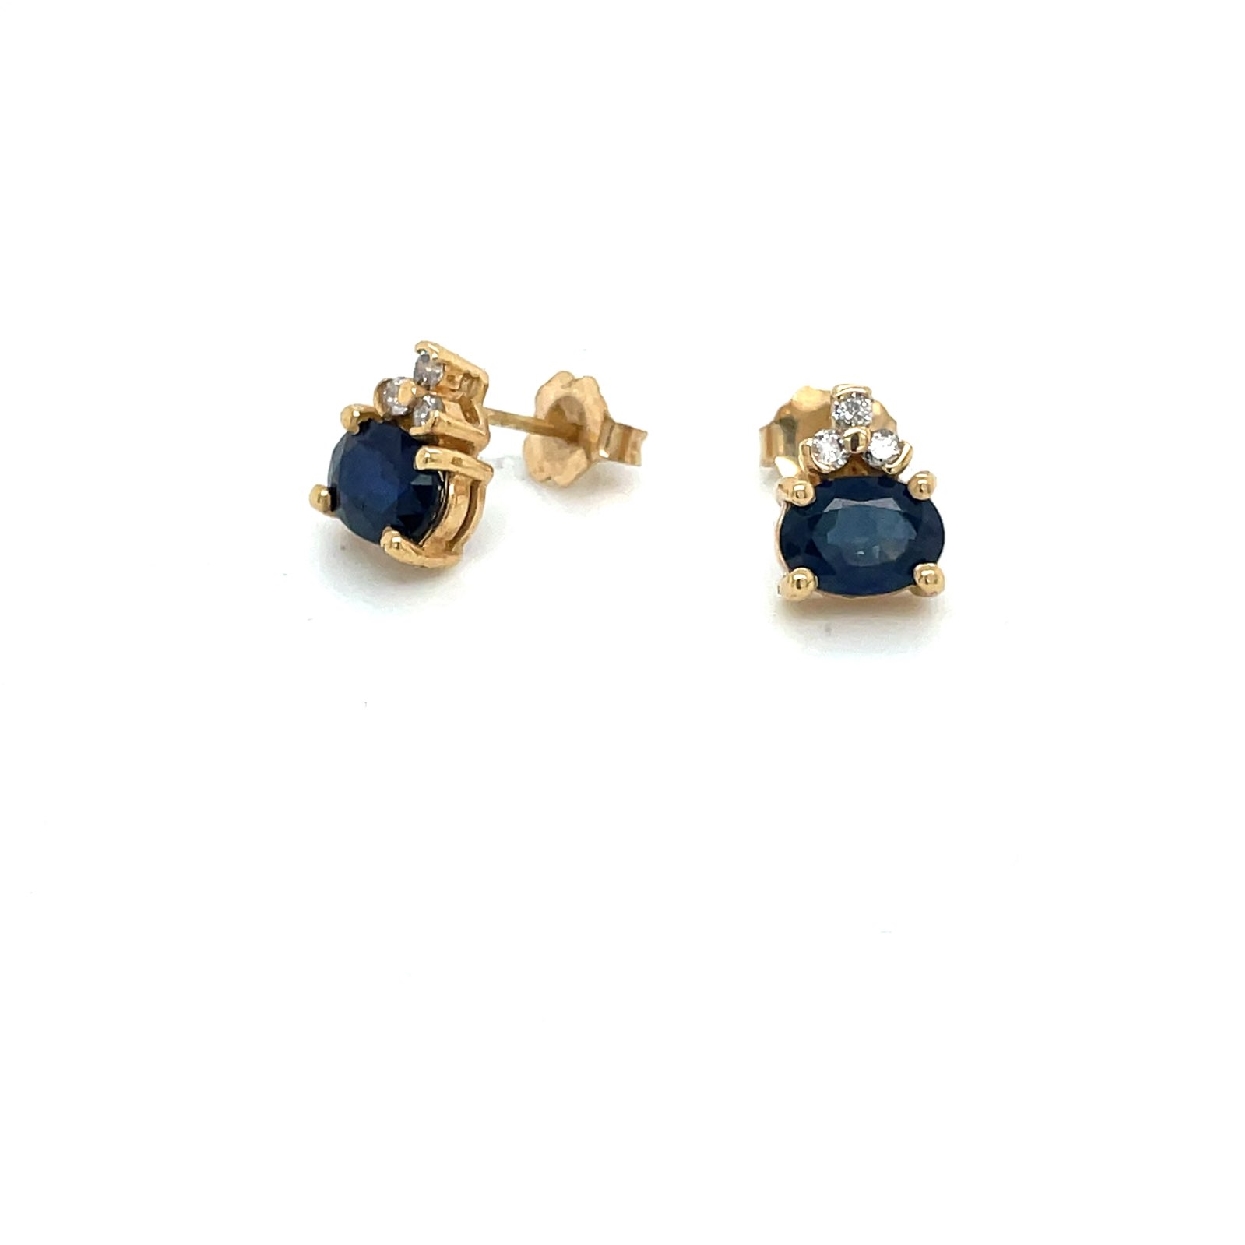 14K Yellow Gold Sapphire Stud Earrings with Diamond Accents. Oval Sapphires Set East-West.

Apx 2cttw Oval Sapphires
0.12cttw Diamonds